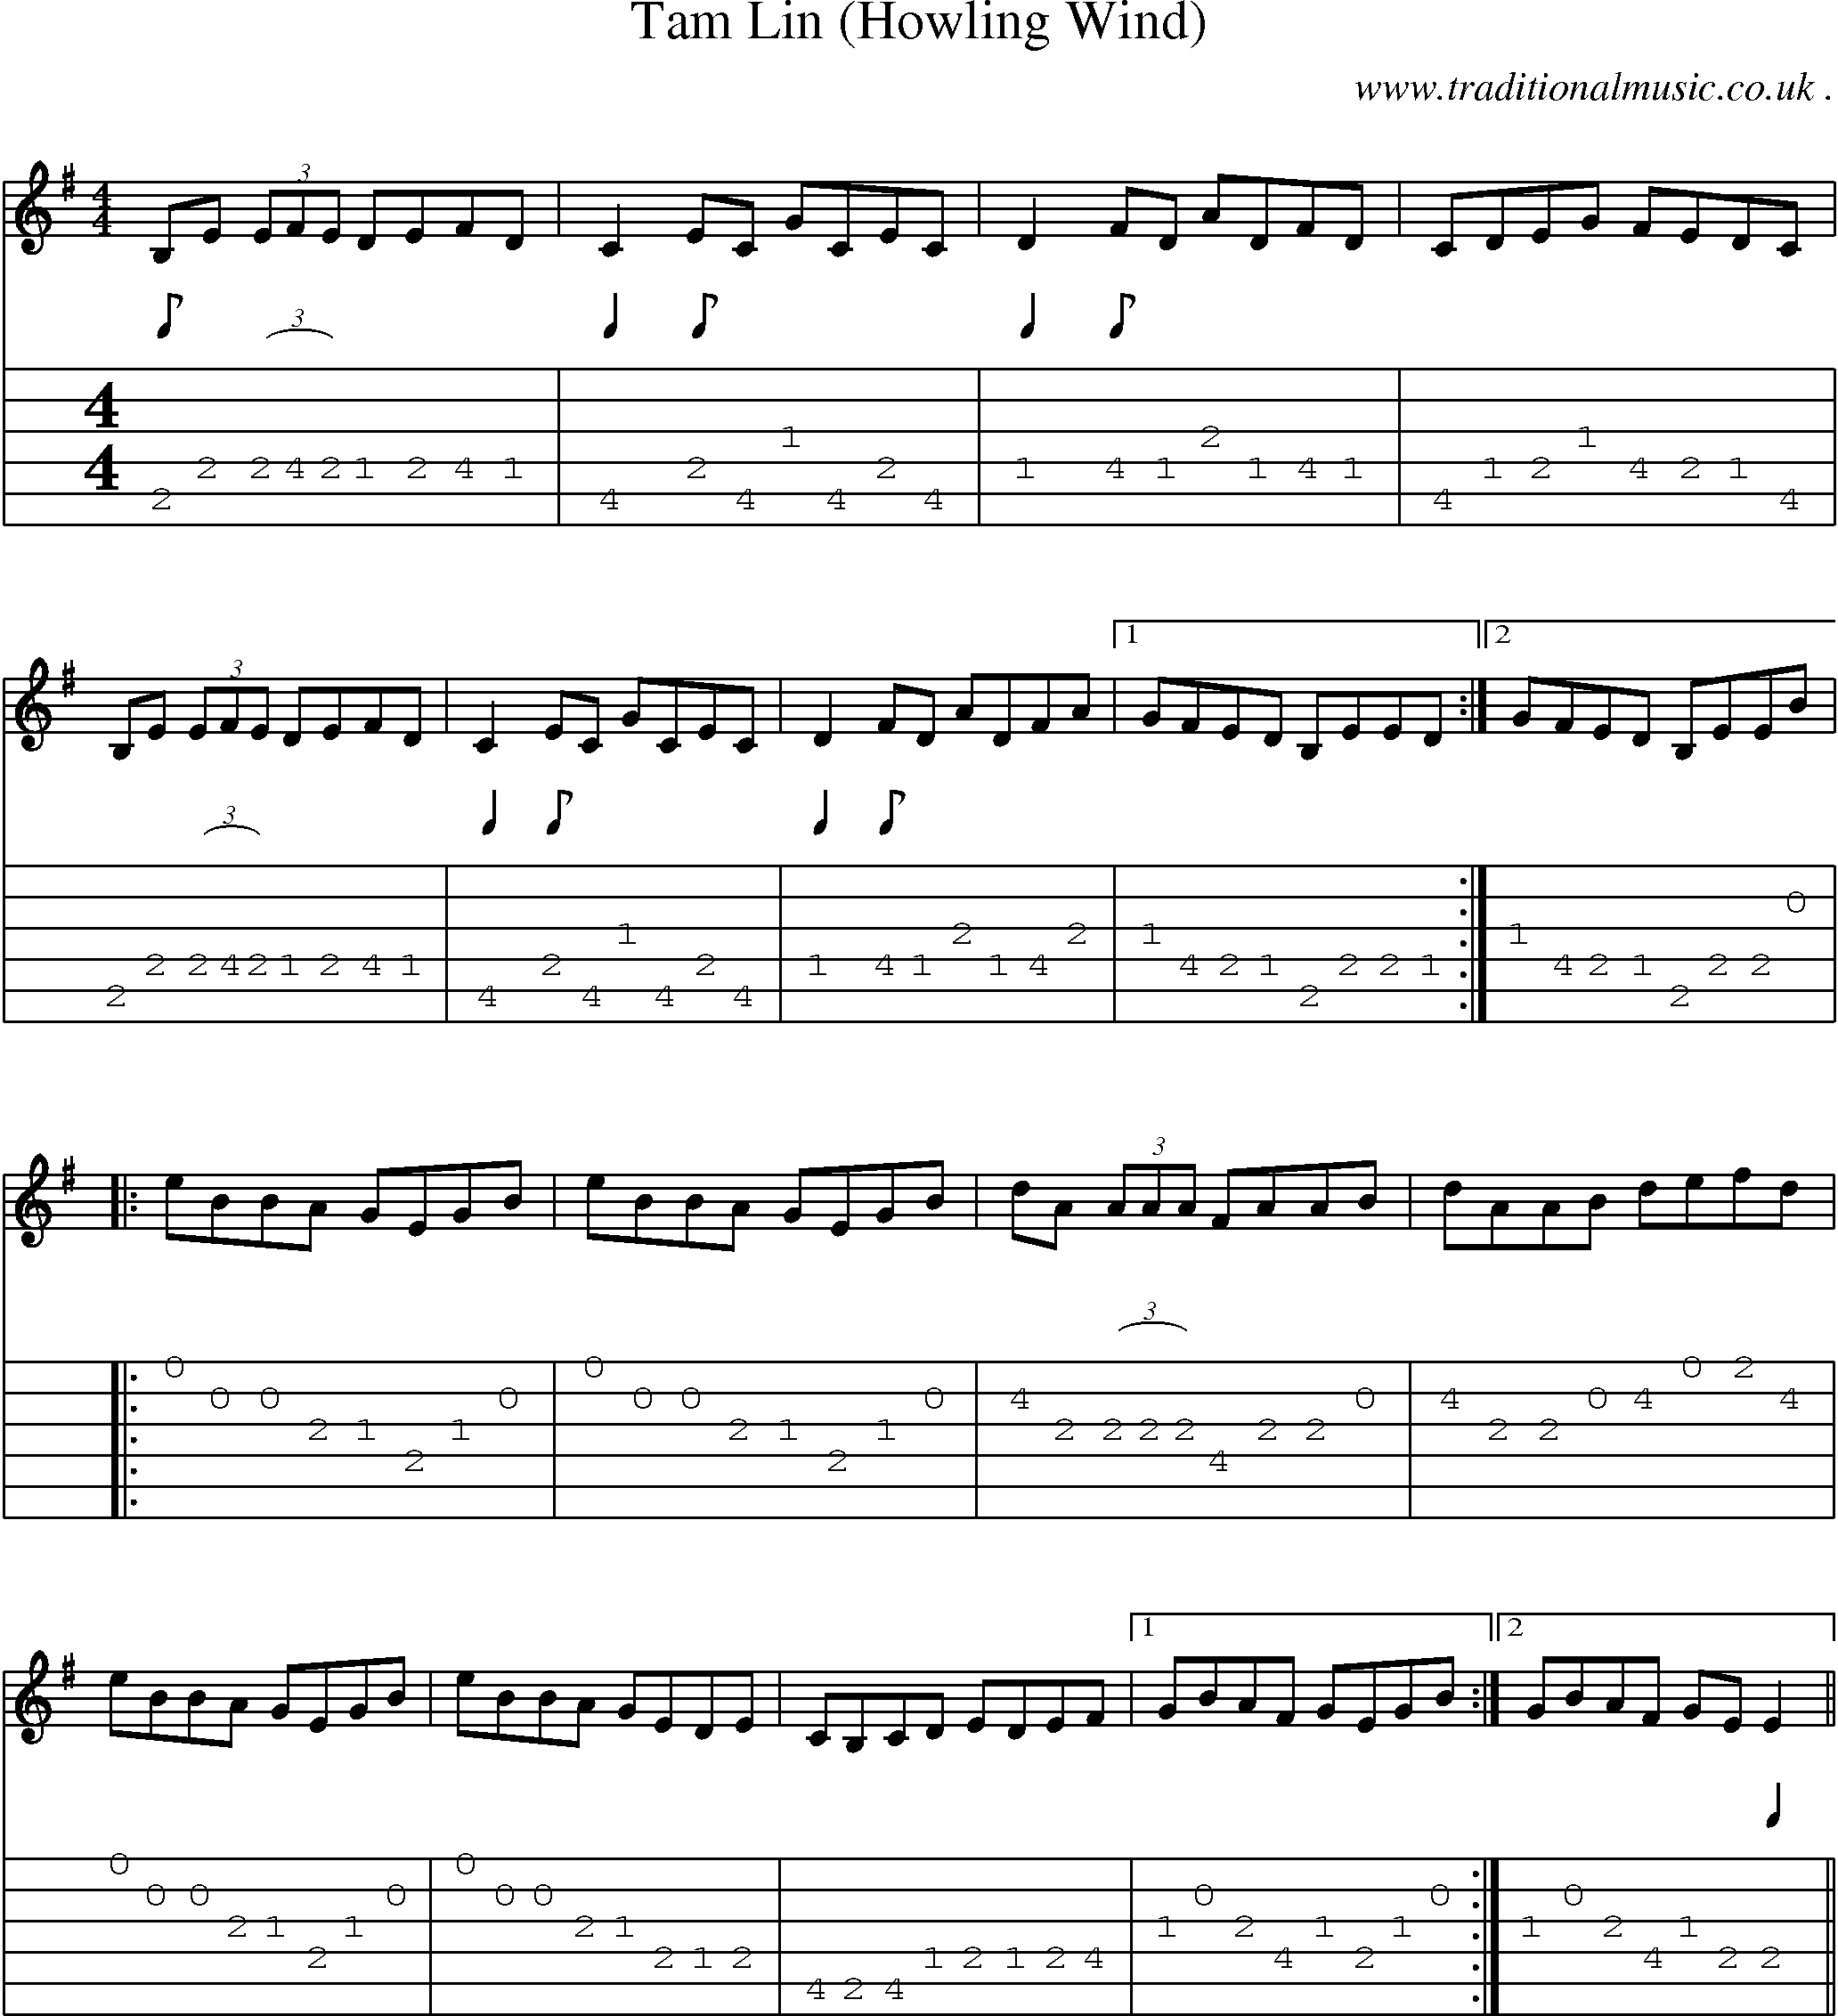 Sheet-Music and Guitar Tabs for Tam Lin (howling Wind)